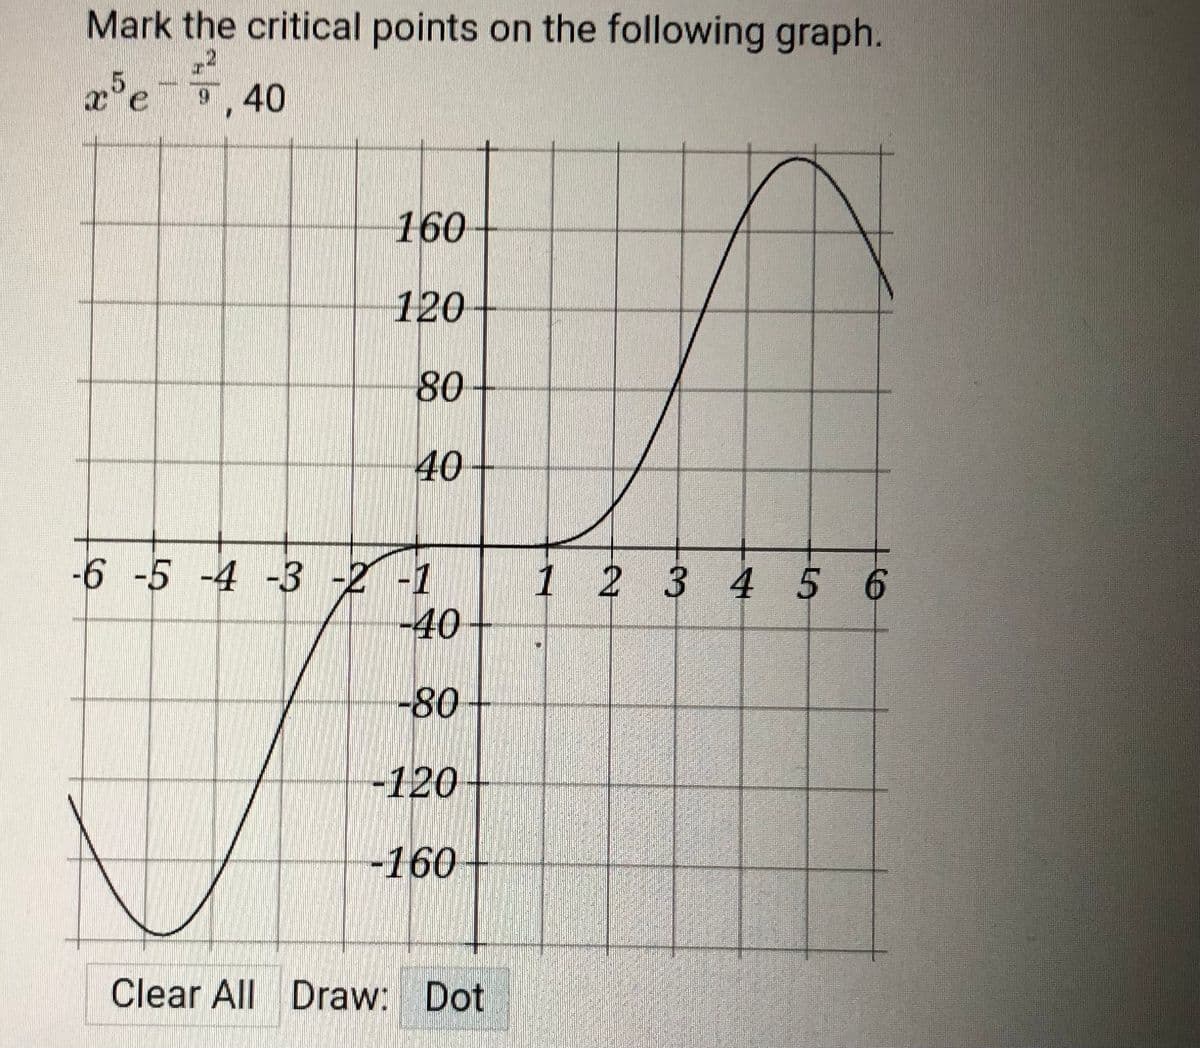 Mark the critical points on the following graph.
e ,40
160
120
80
40
-
-6 -5 -4 -3 -2 -1
-40-
1 2 3 4 5 6
-80-
-120
-160
Clear All Draw: Dot
